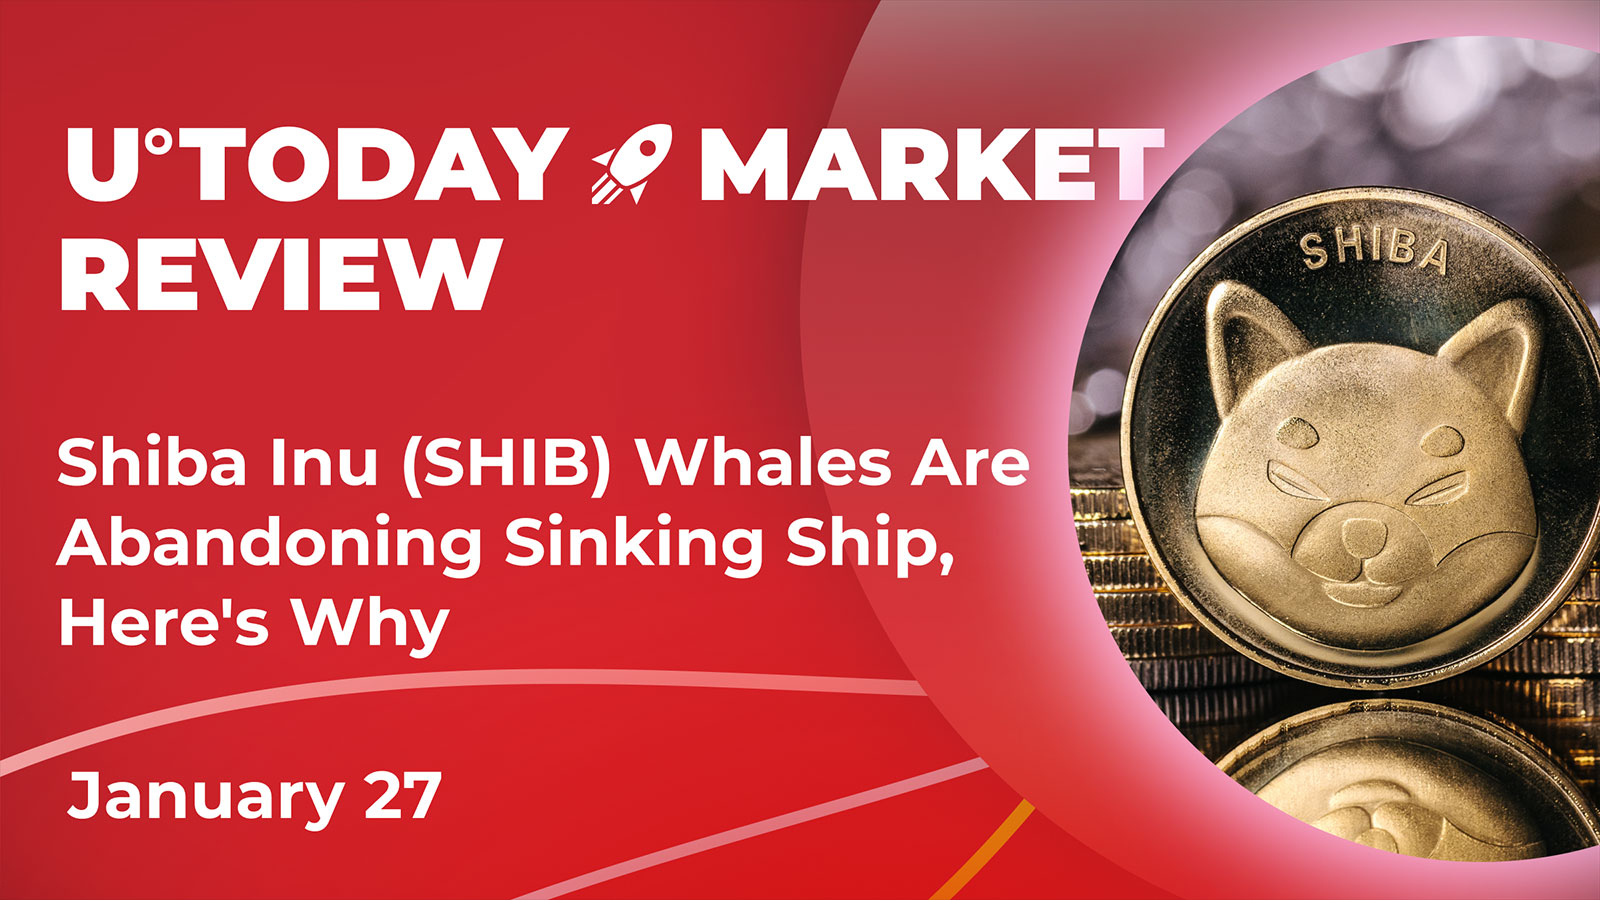 Shiba Inu (SHIB) Whales Are Abandoning Sinking Ship, Here's Why